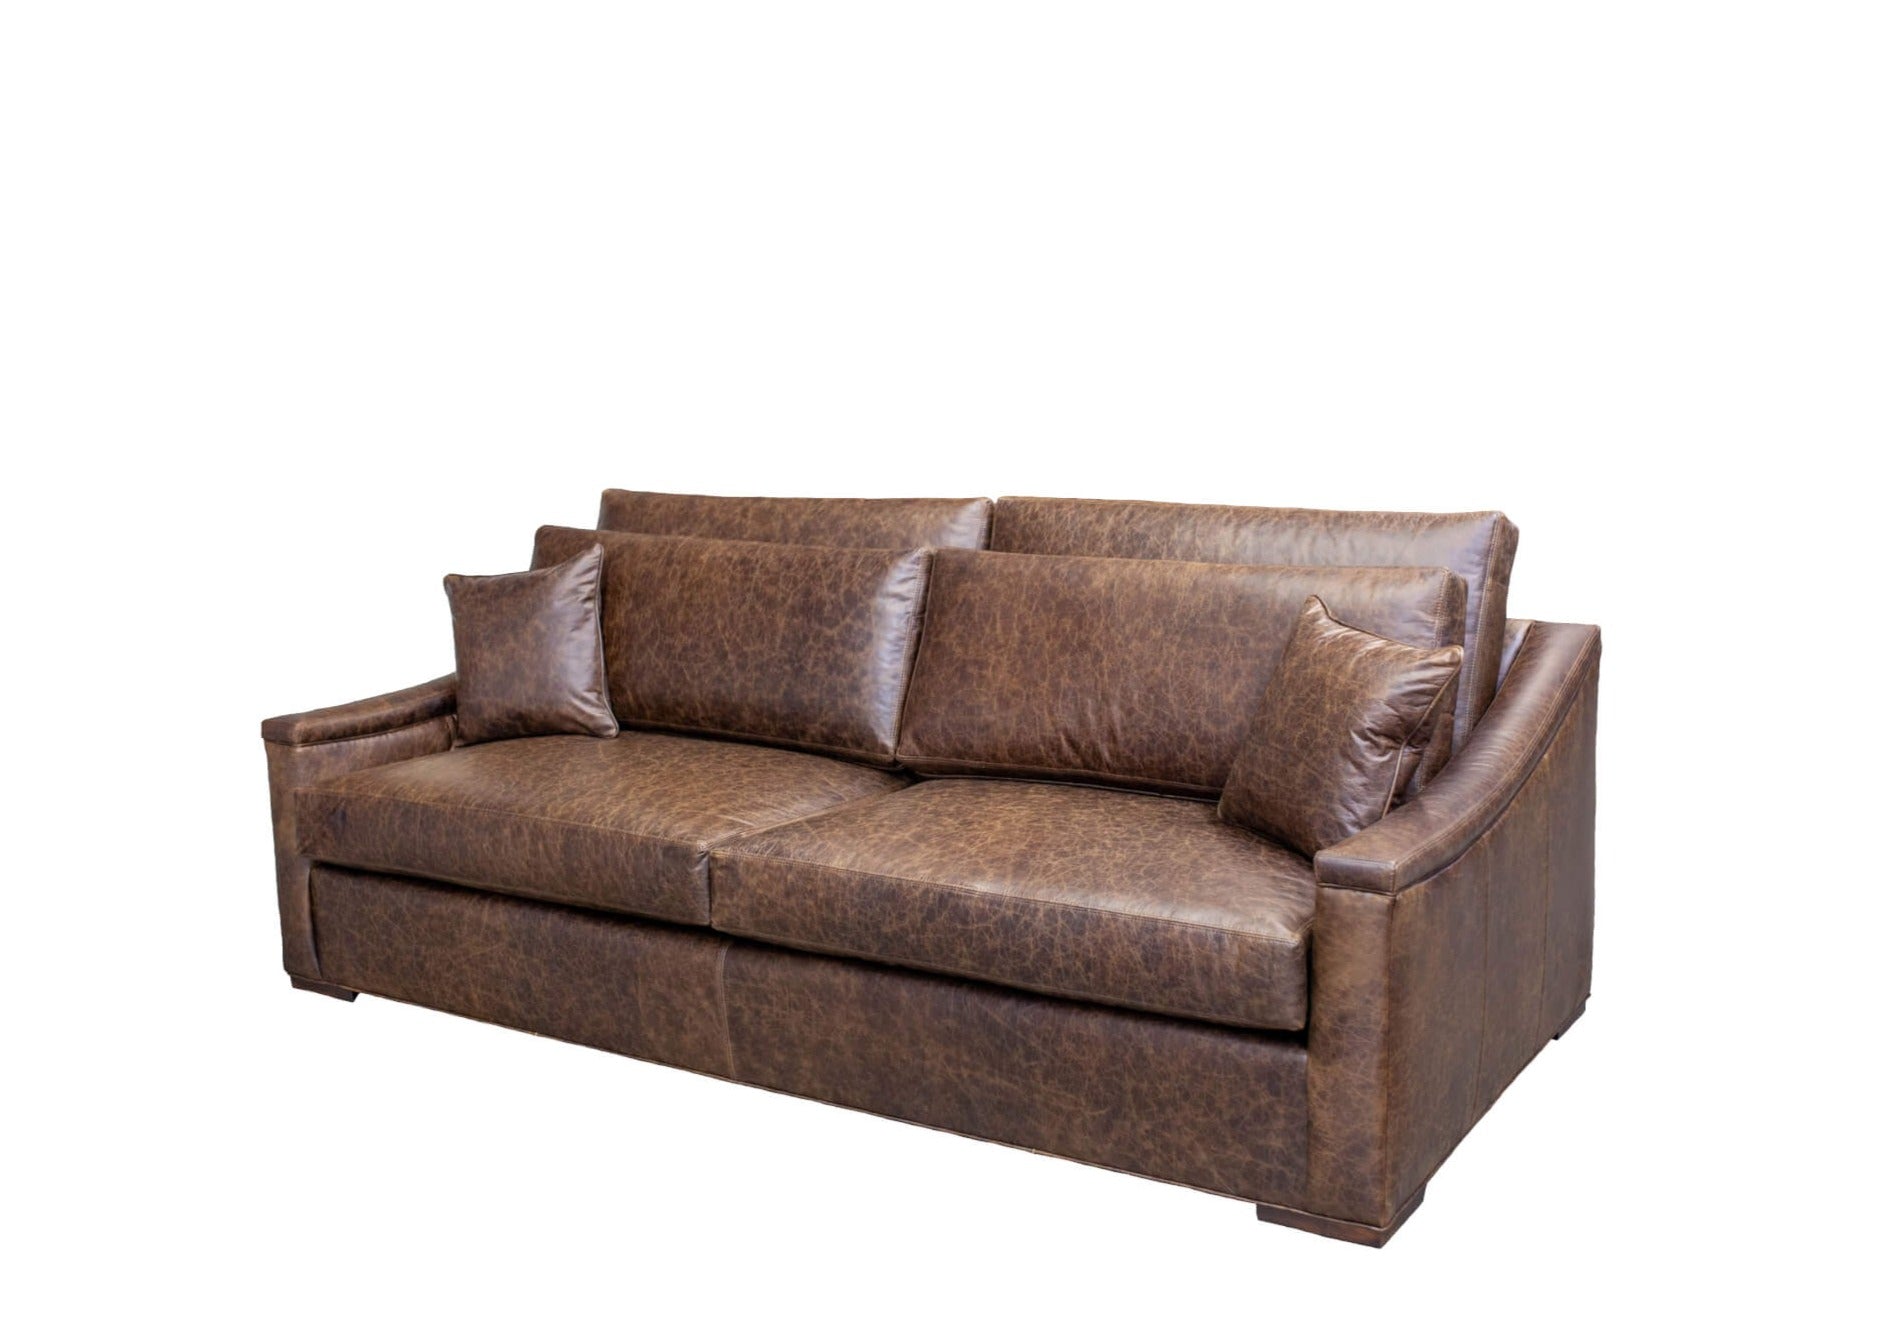 The Double Cushion Leather Sofa is an ideal pick for a living room. It offers superior comfort with two tight-stitched cushions, layered with top grain leather upholstery. The sofa blend of style and modern comfort makes it the perfect addition to any home décor.